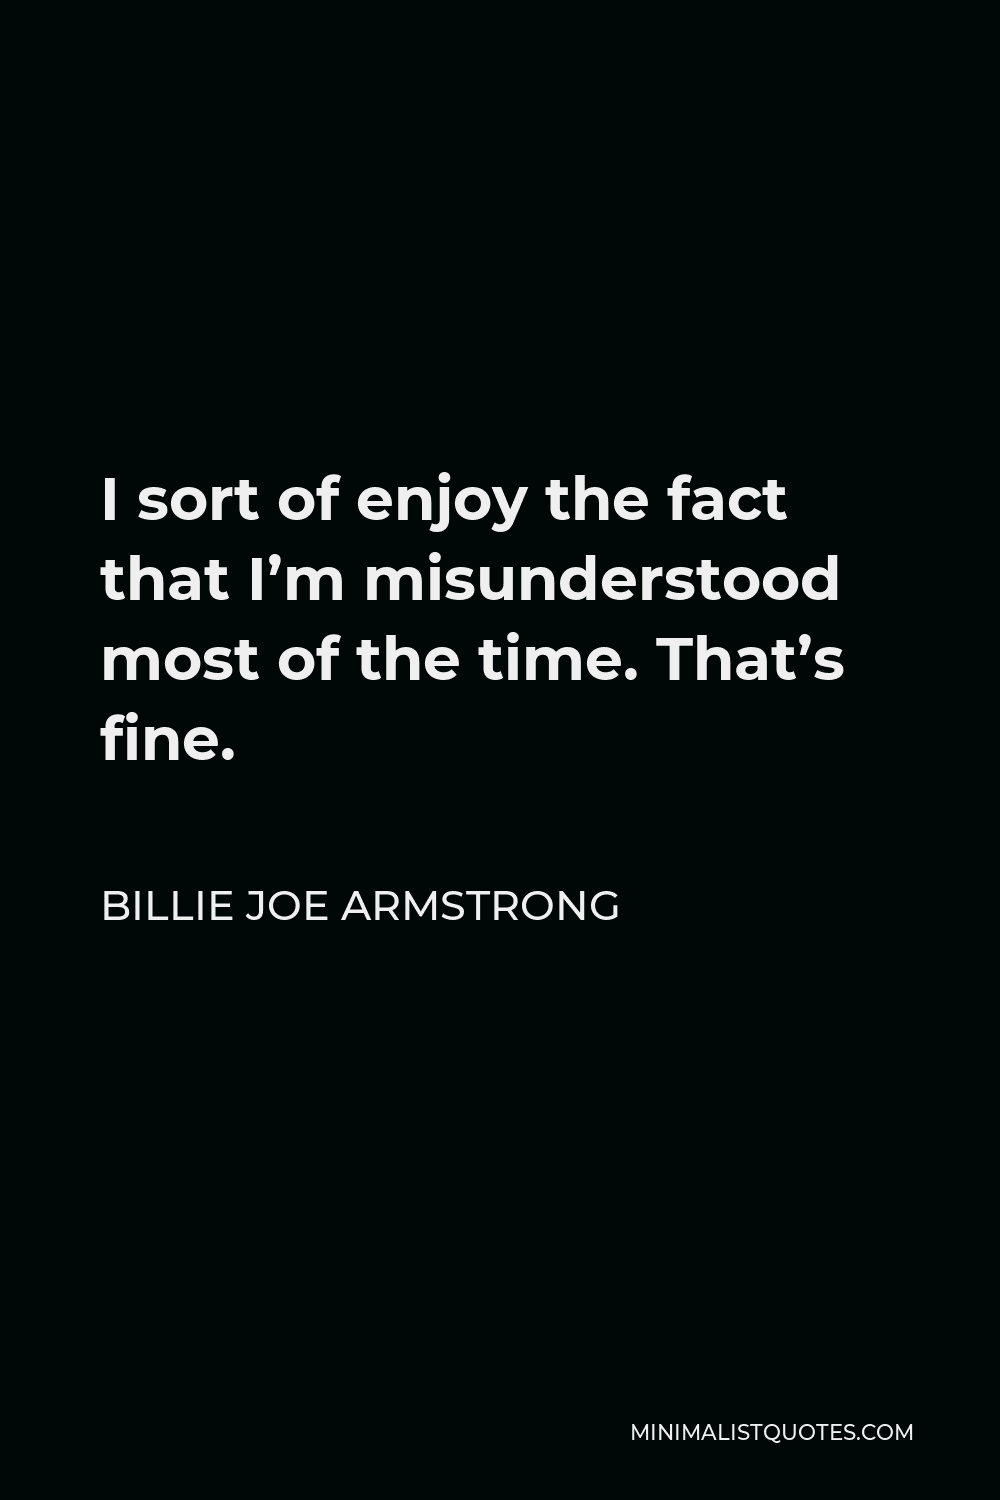 Billie Joe Armstrong Quote - I sort of enjoy the fact that I’m misunderstood most of the time. That’s fine.